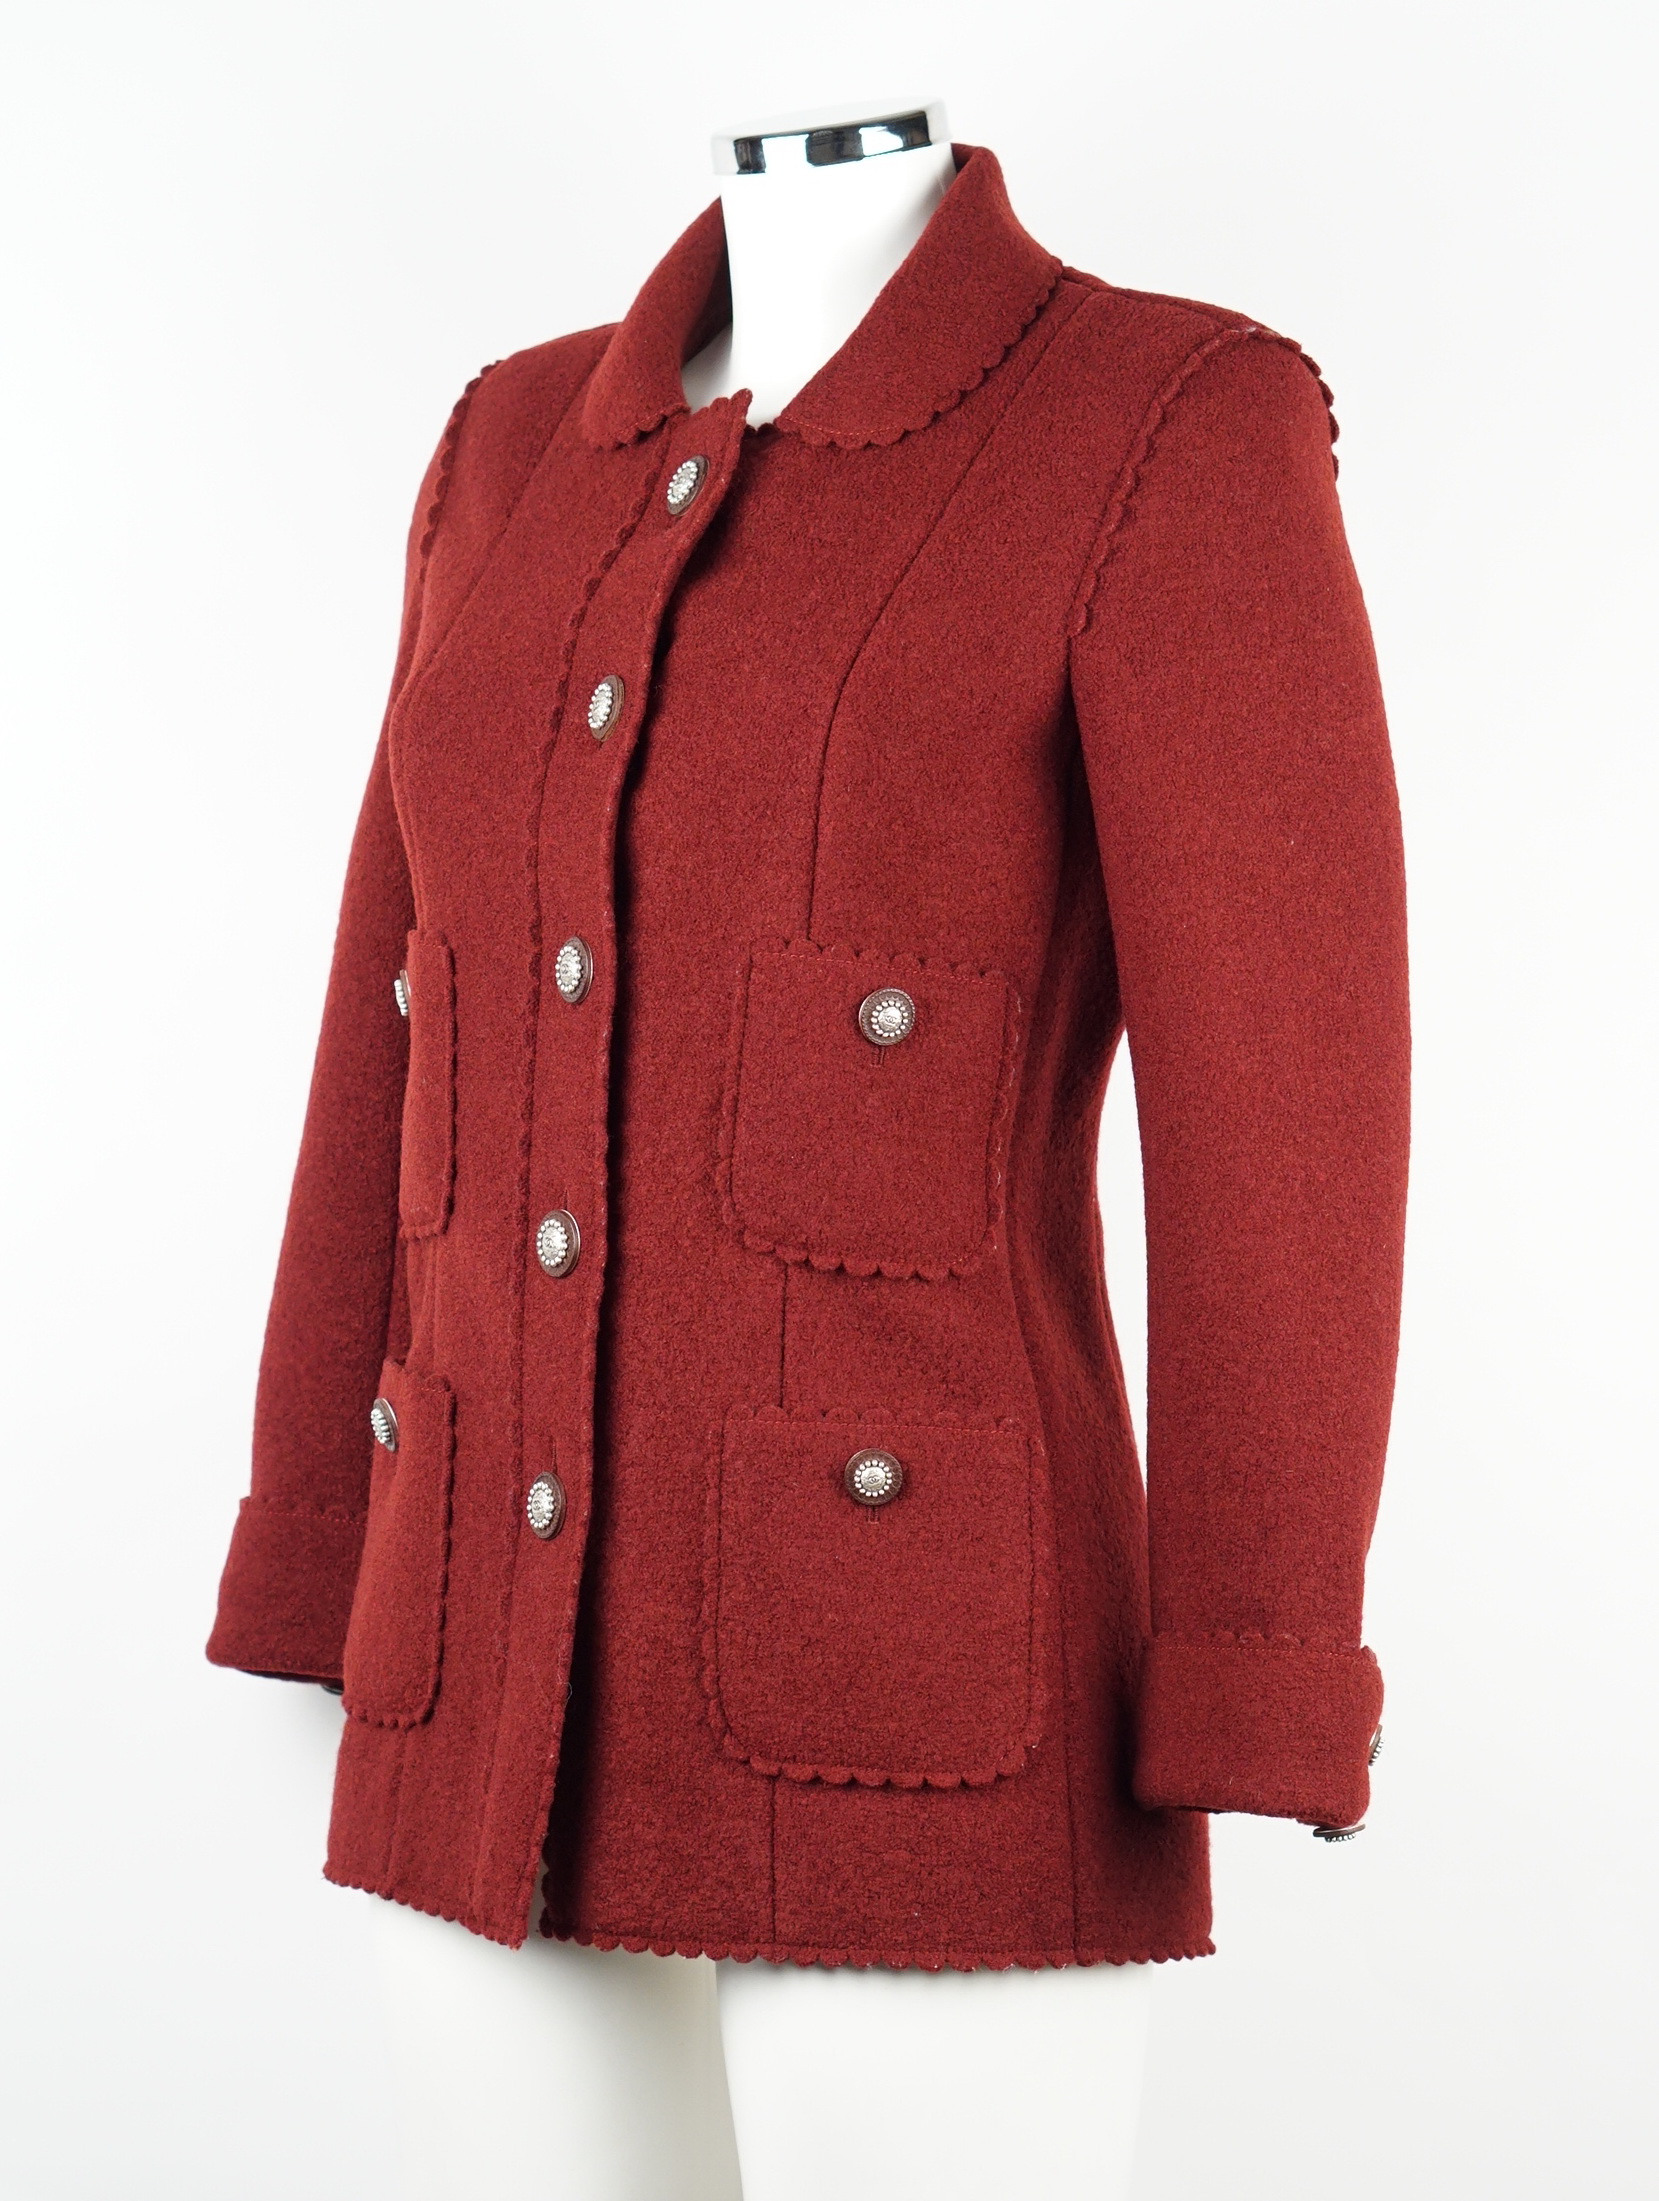 JACKE - CHANEL WOLLE ROT